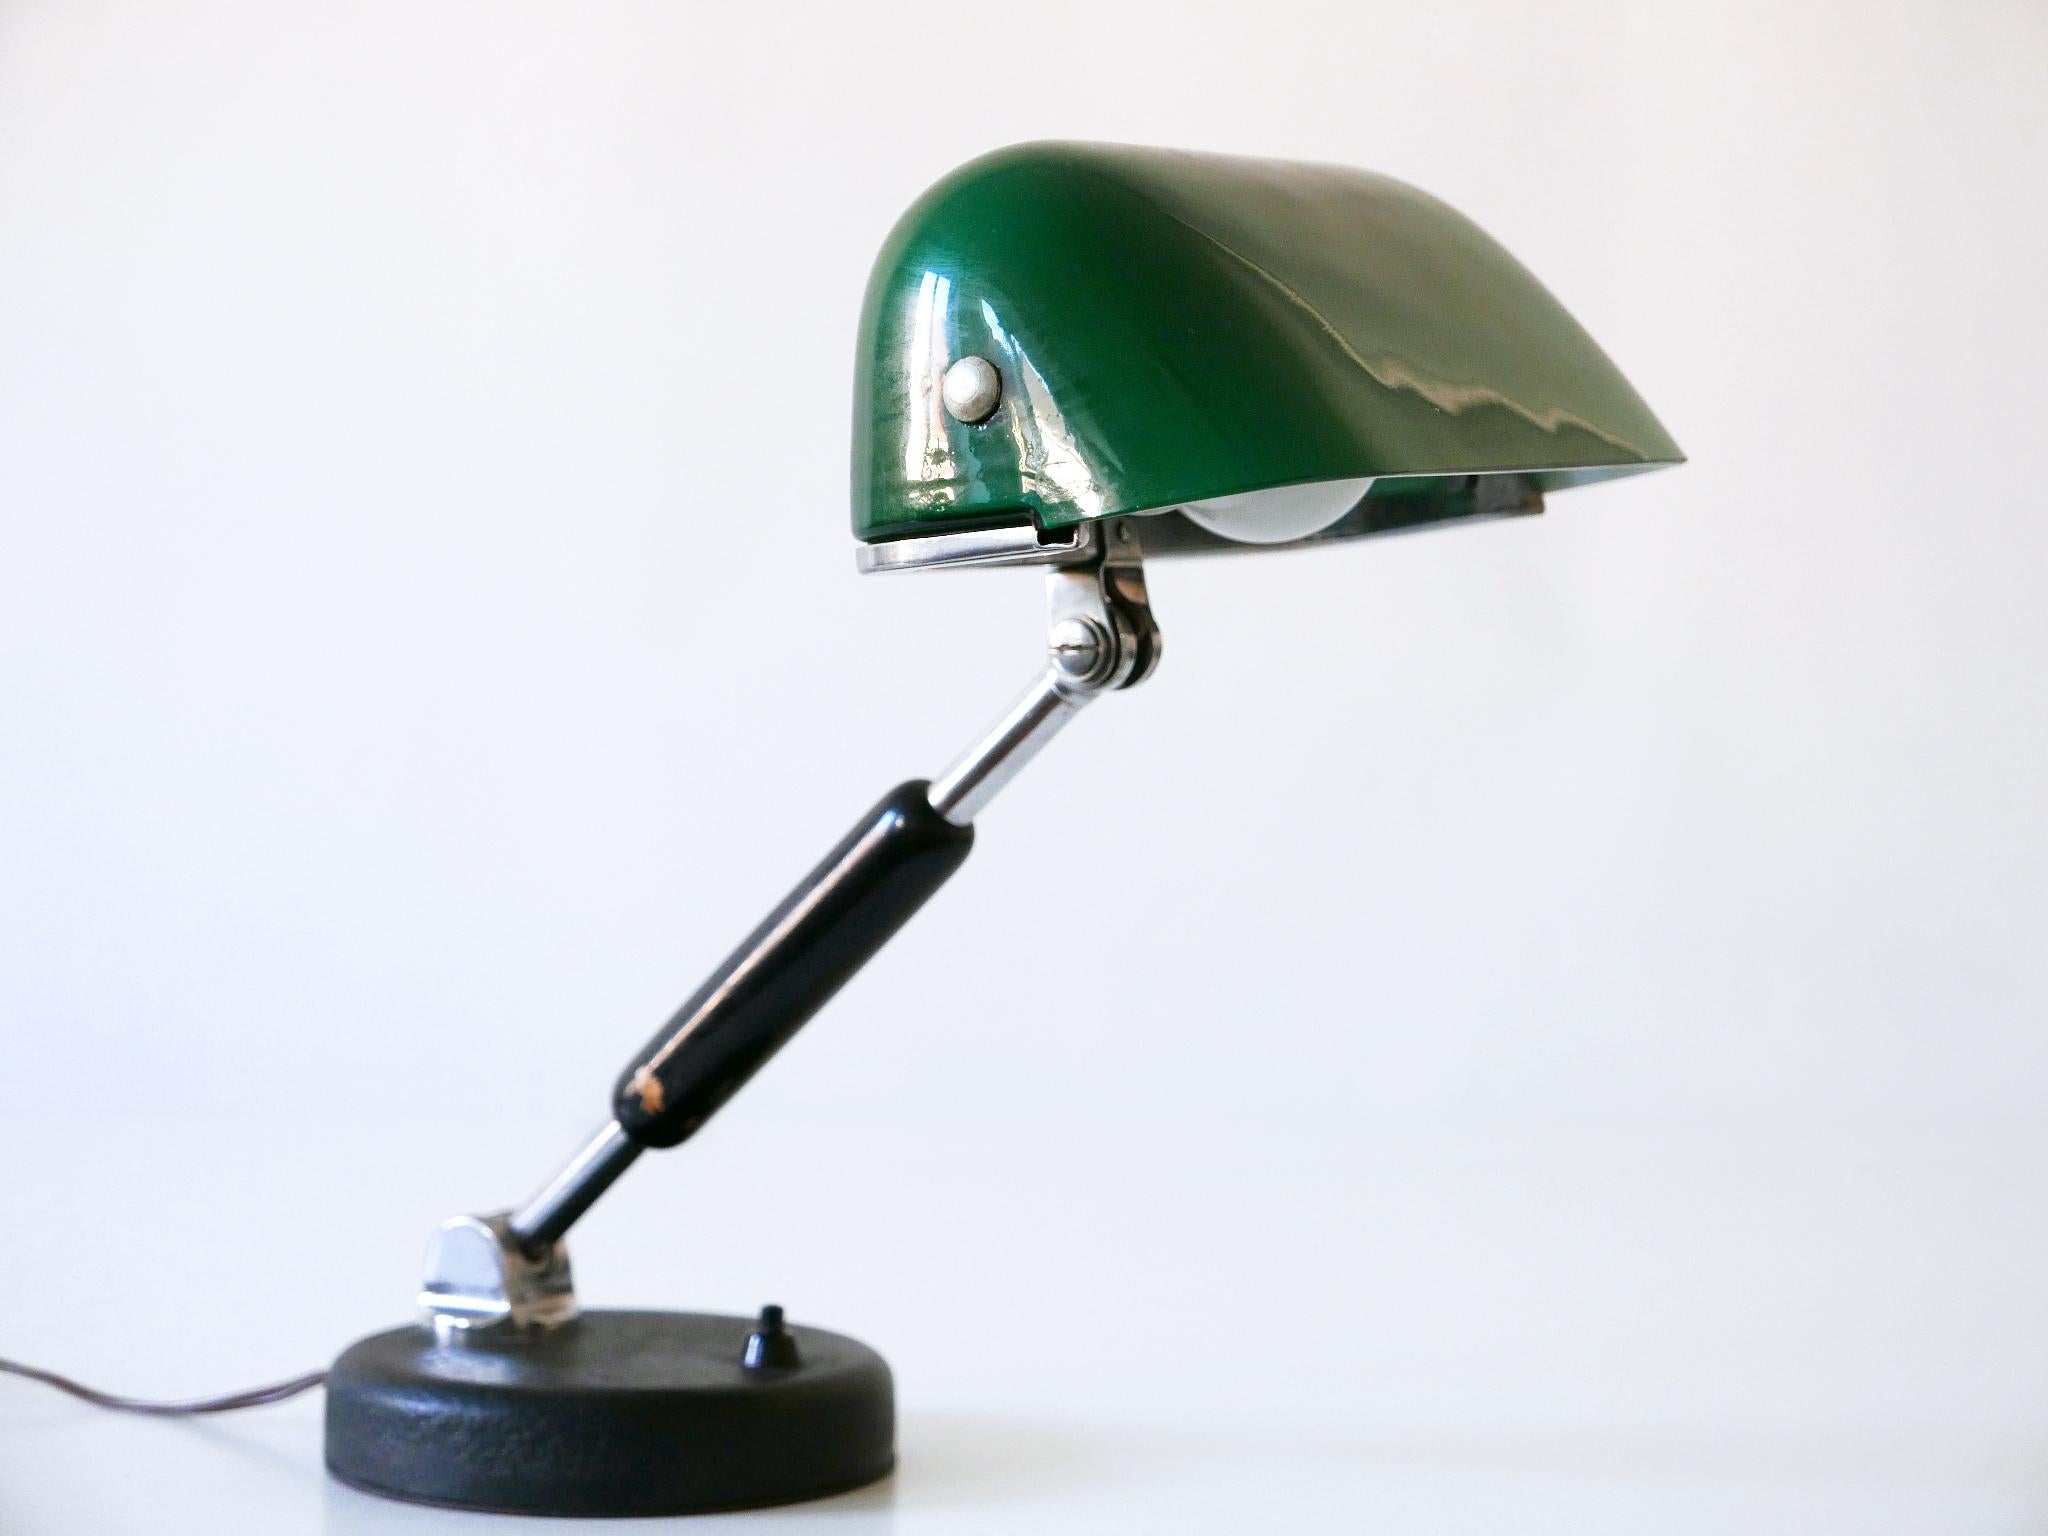 Rare and elegant Bauhaus / Modernist bankers table lamp or desk light. Adjustable arm and shade. Designed and manufactured, in 1930s, Germany. Interrupter on the base.

Executed in nickel-plated brass, thick green glass, black lacquered wood and